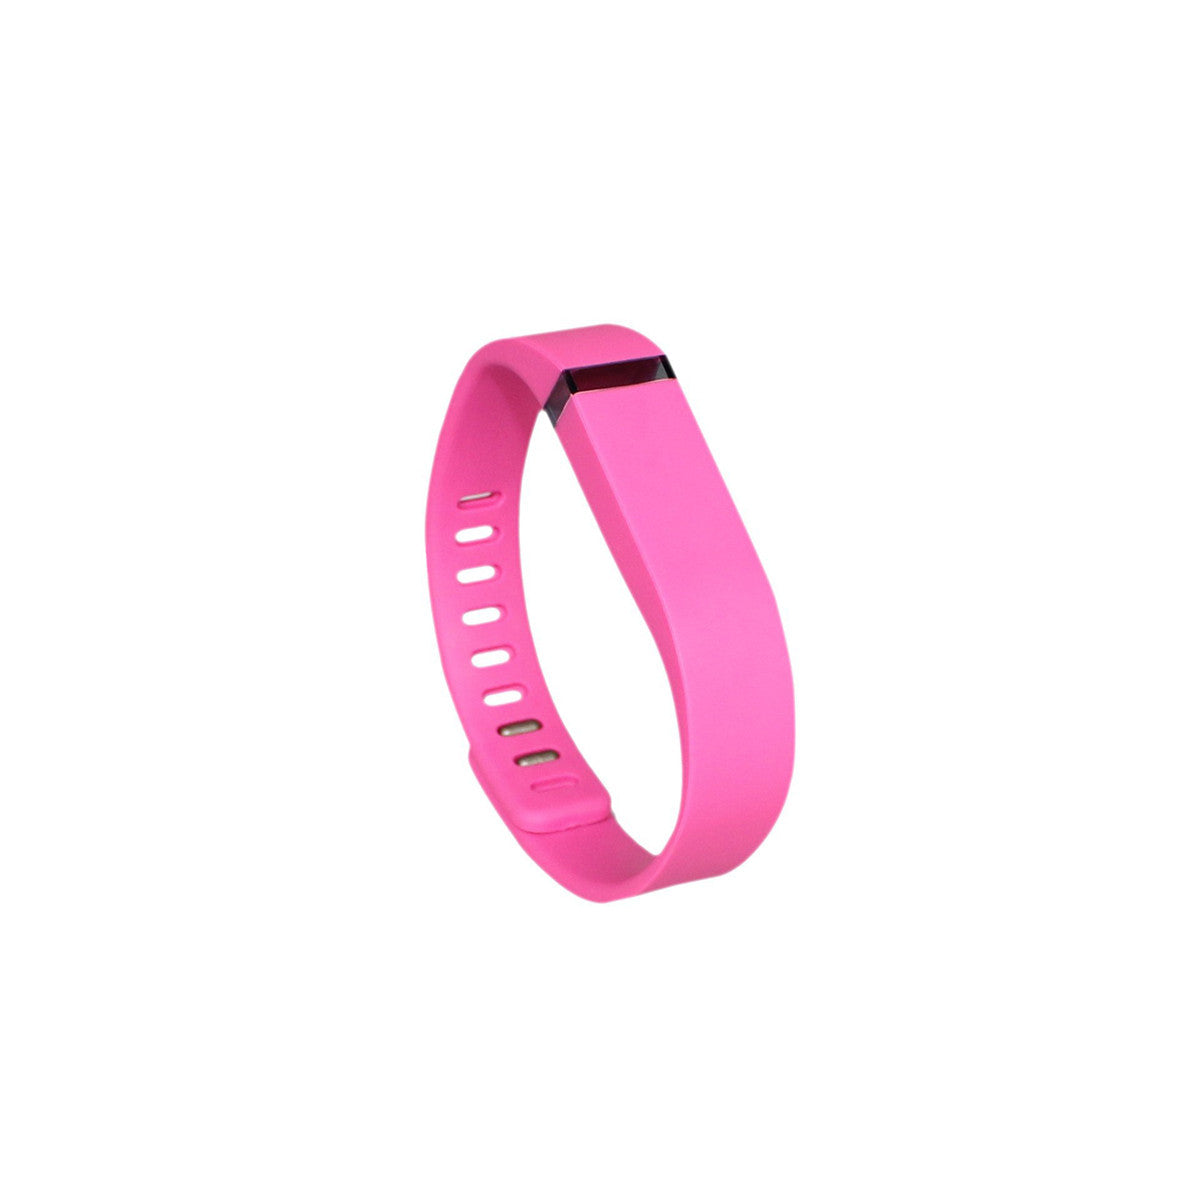 Fitbit Flex Bands Replacement Bracelet Wristband With Clasp Small Pink 